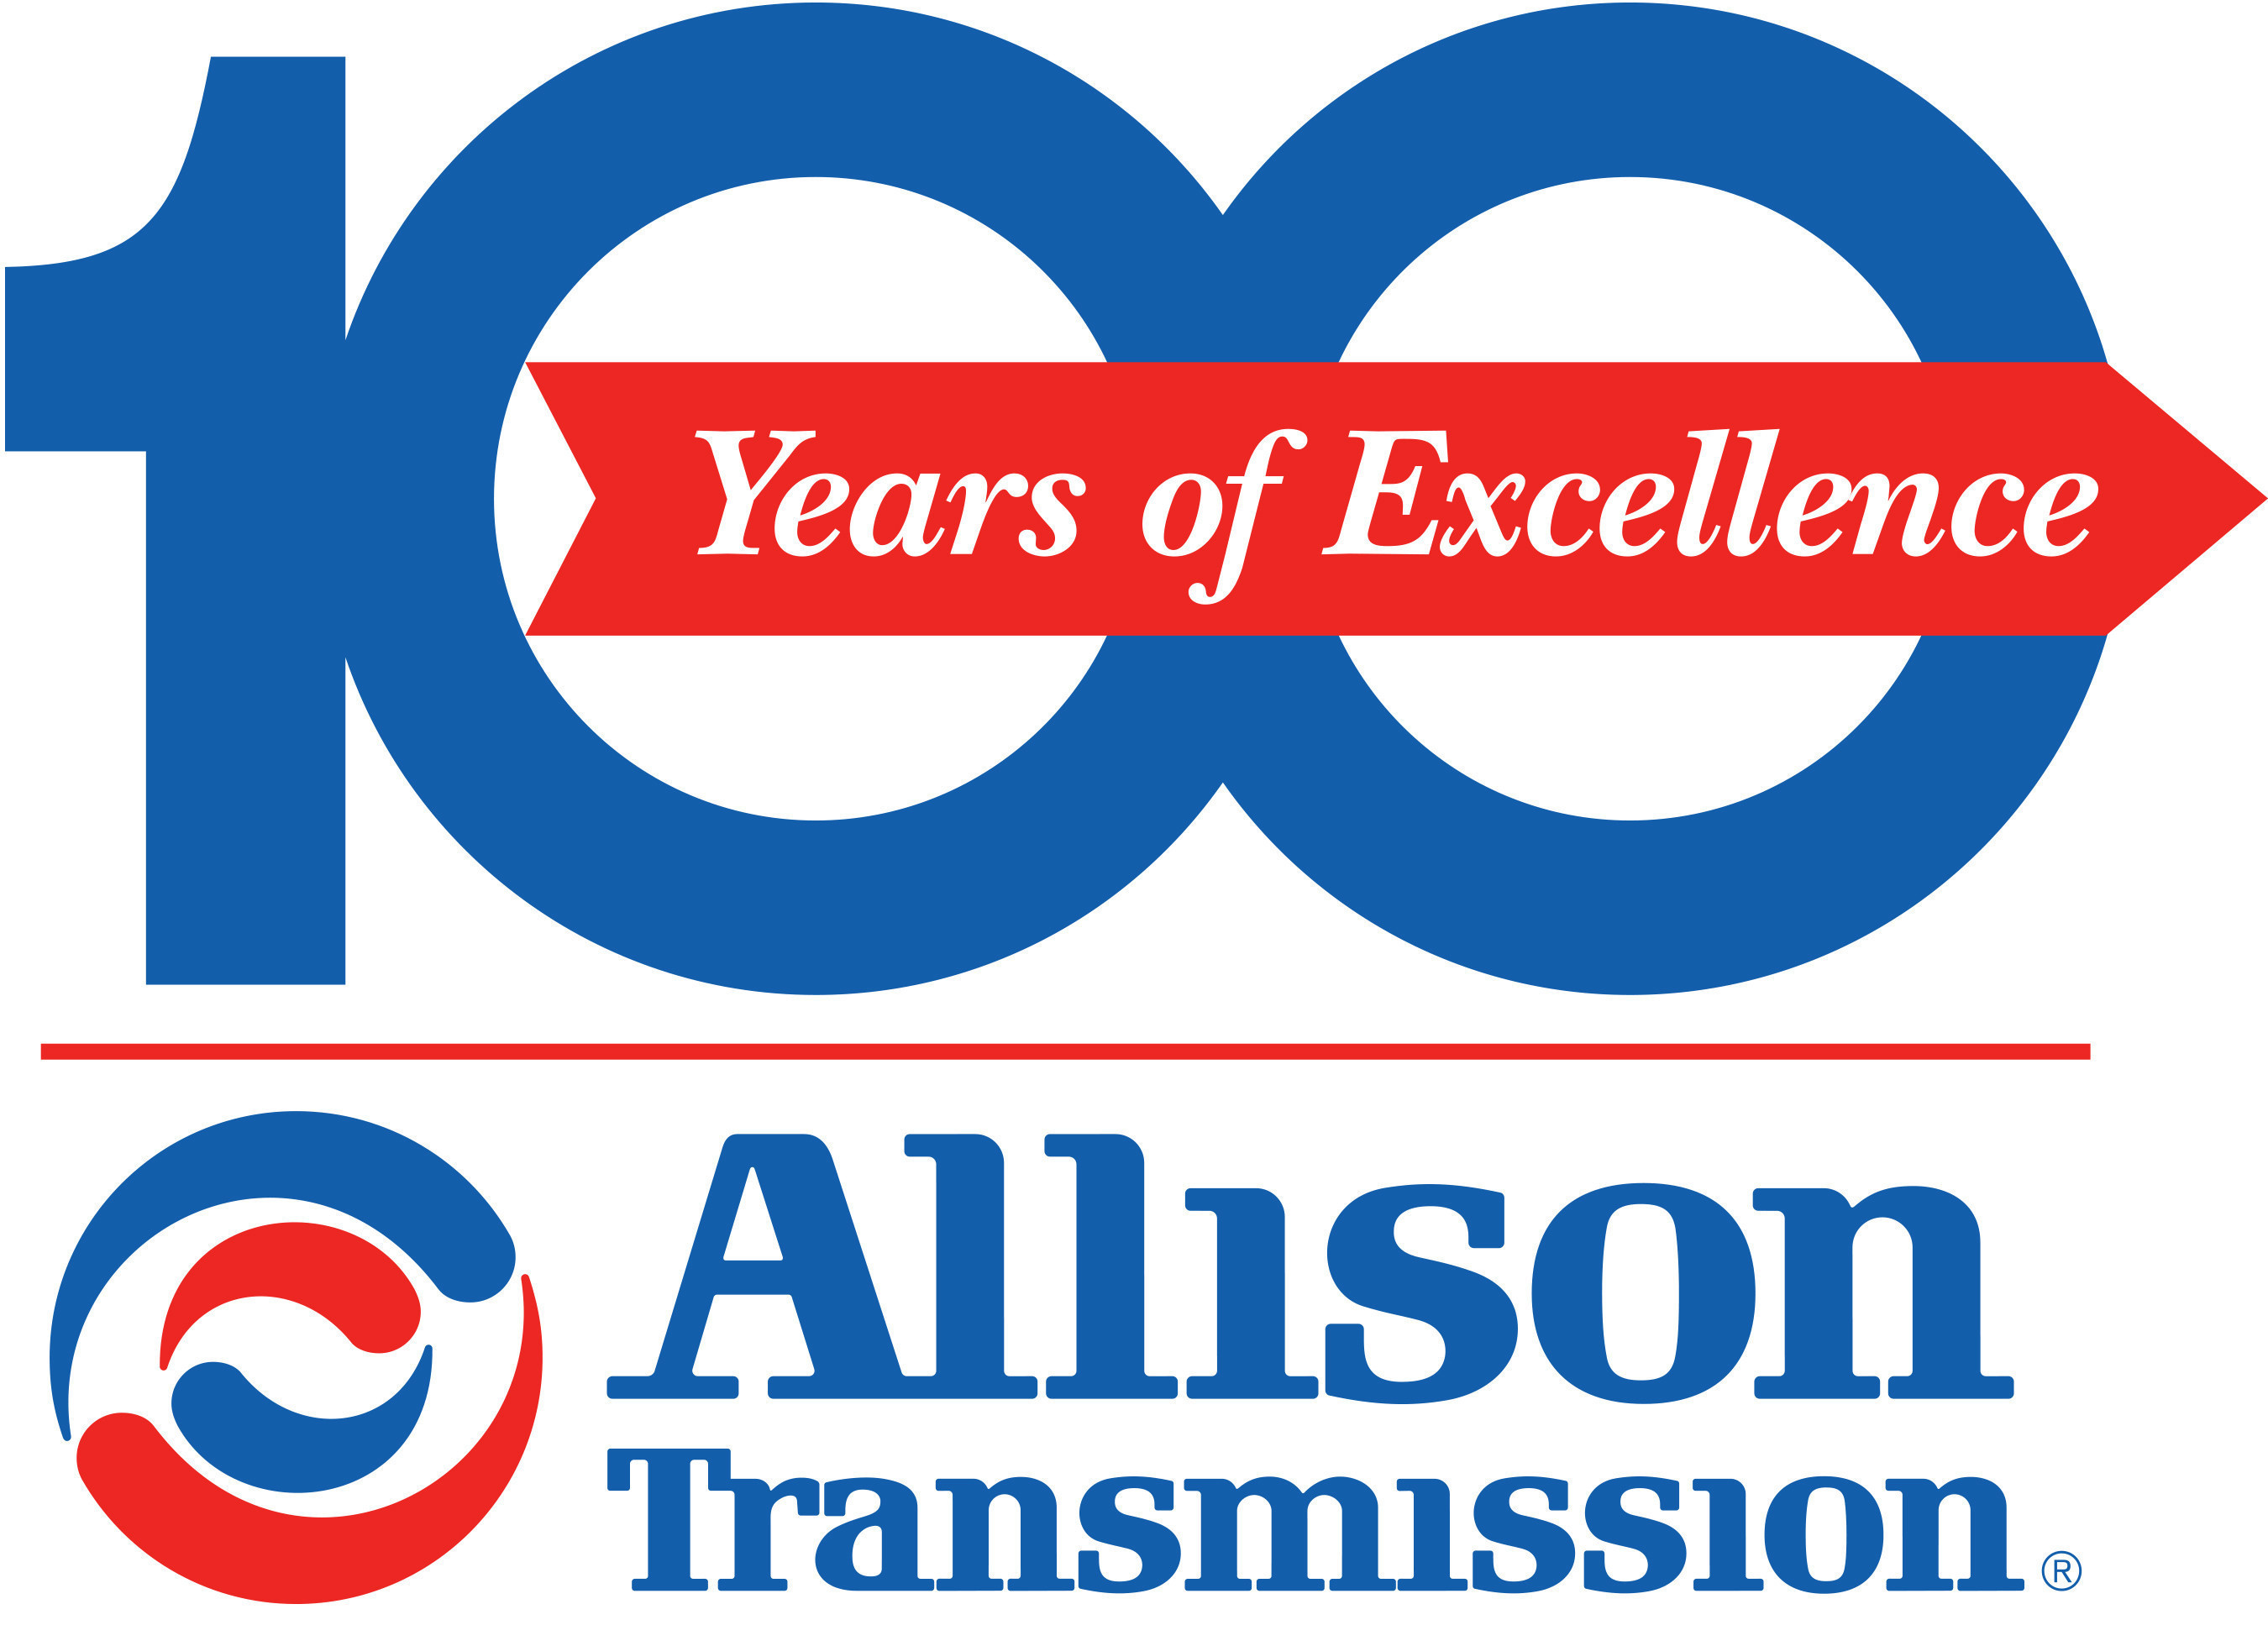 Allison Transmission will celebrate its centennial throughout 2015 with a variety of special events and activities.